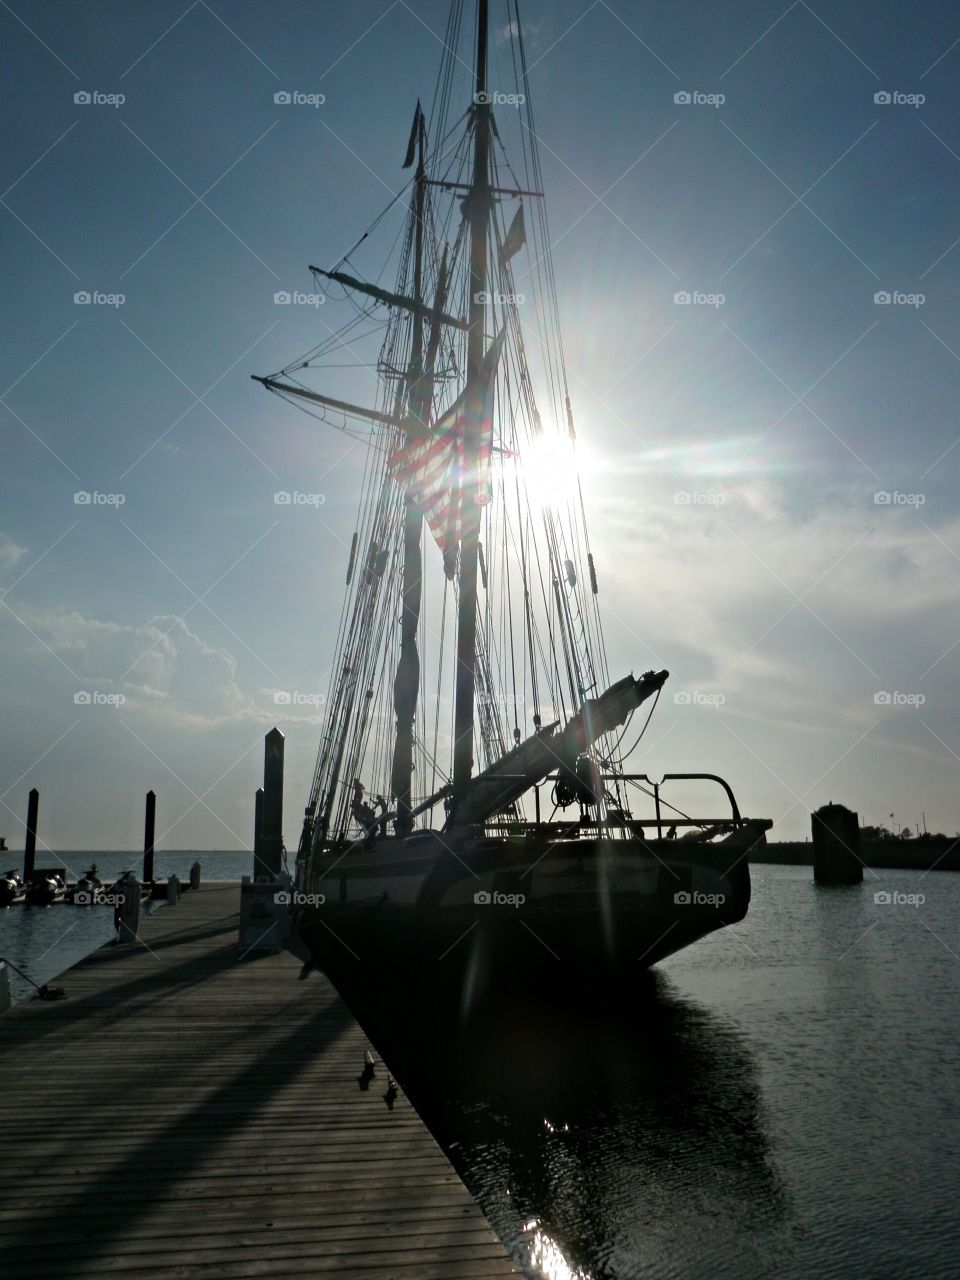 Cape Charles Sail Boat picture